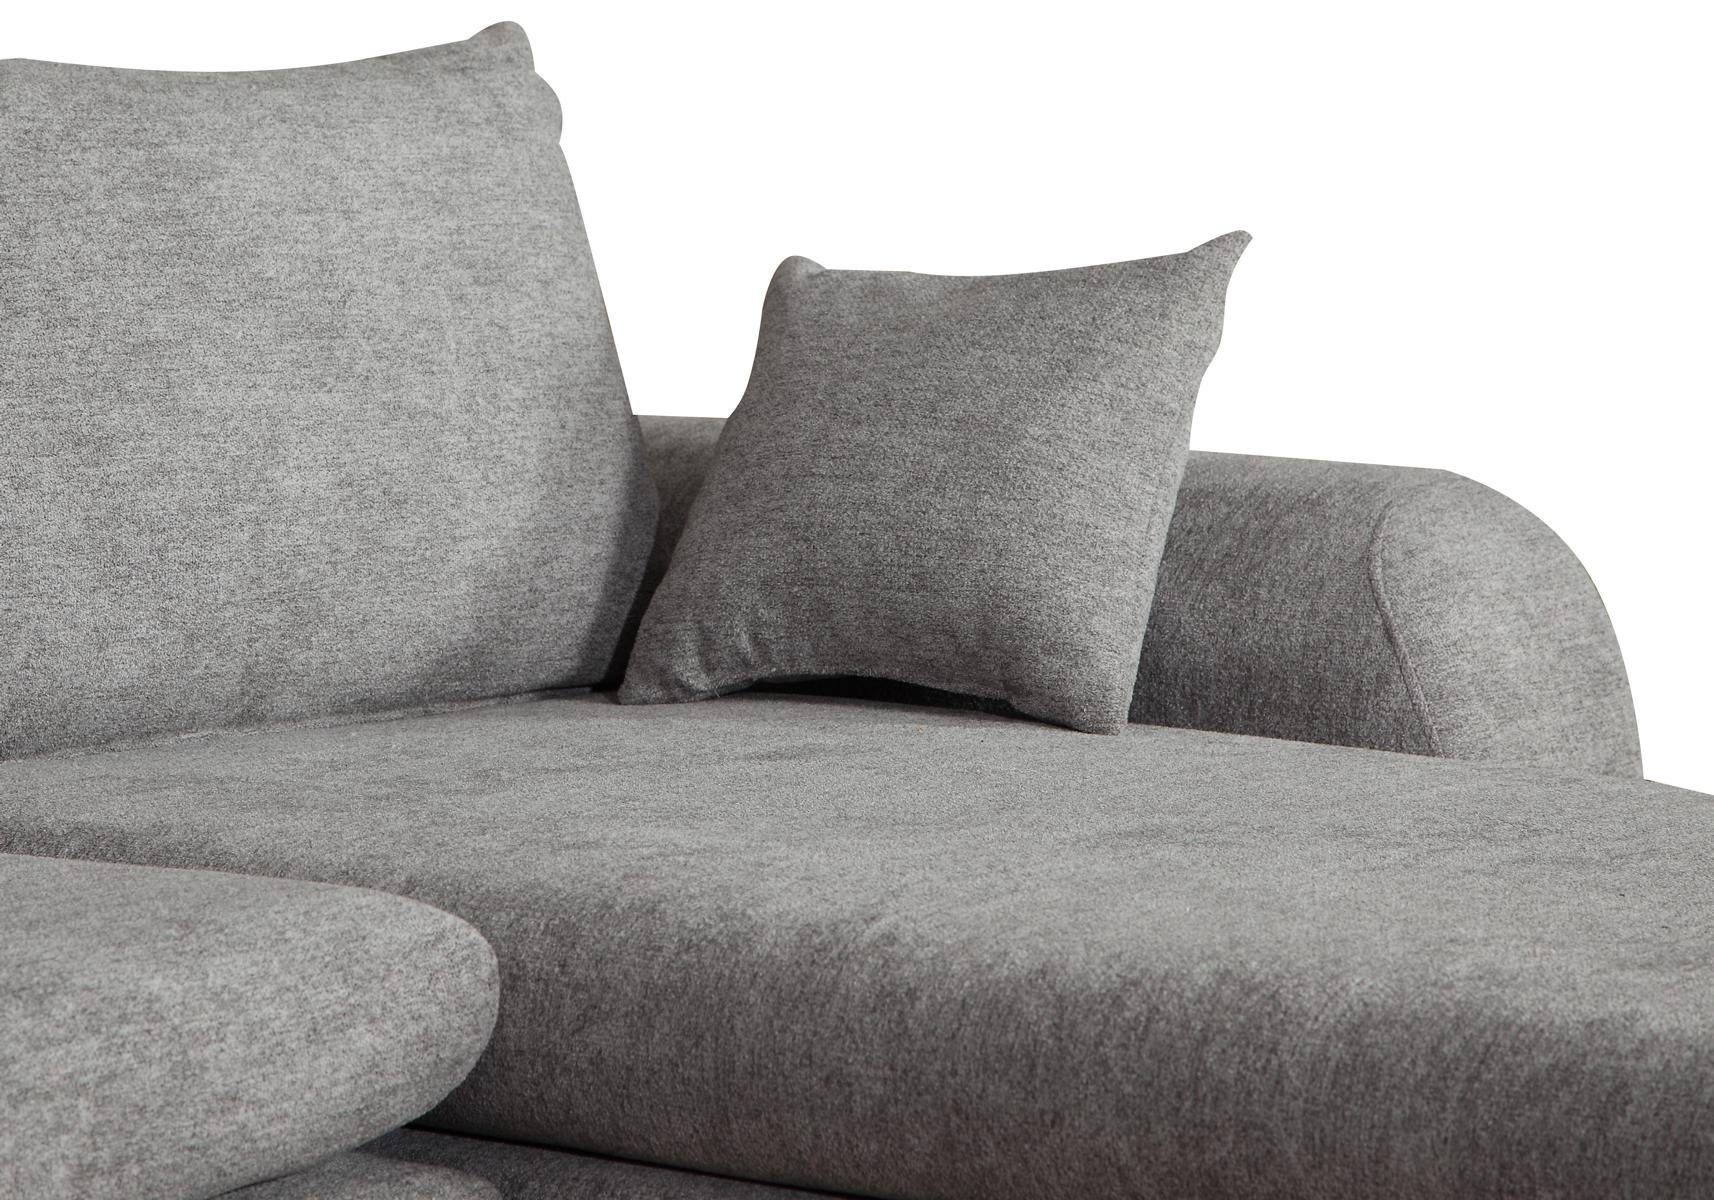 Polster Form Stoffsofa Couch Sofa Wohnlandschaft, JVmoebel Europe L Sofa in Made